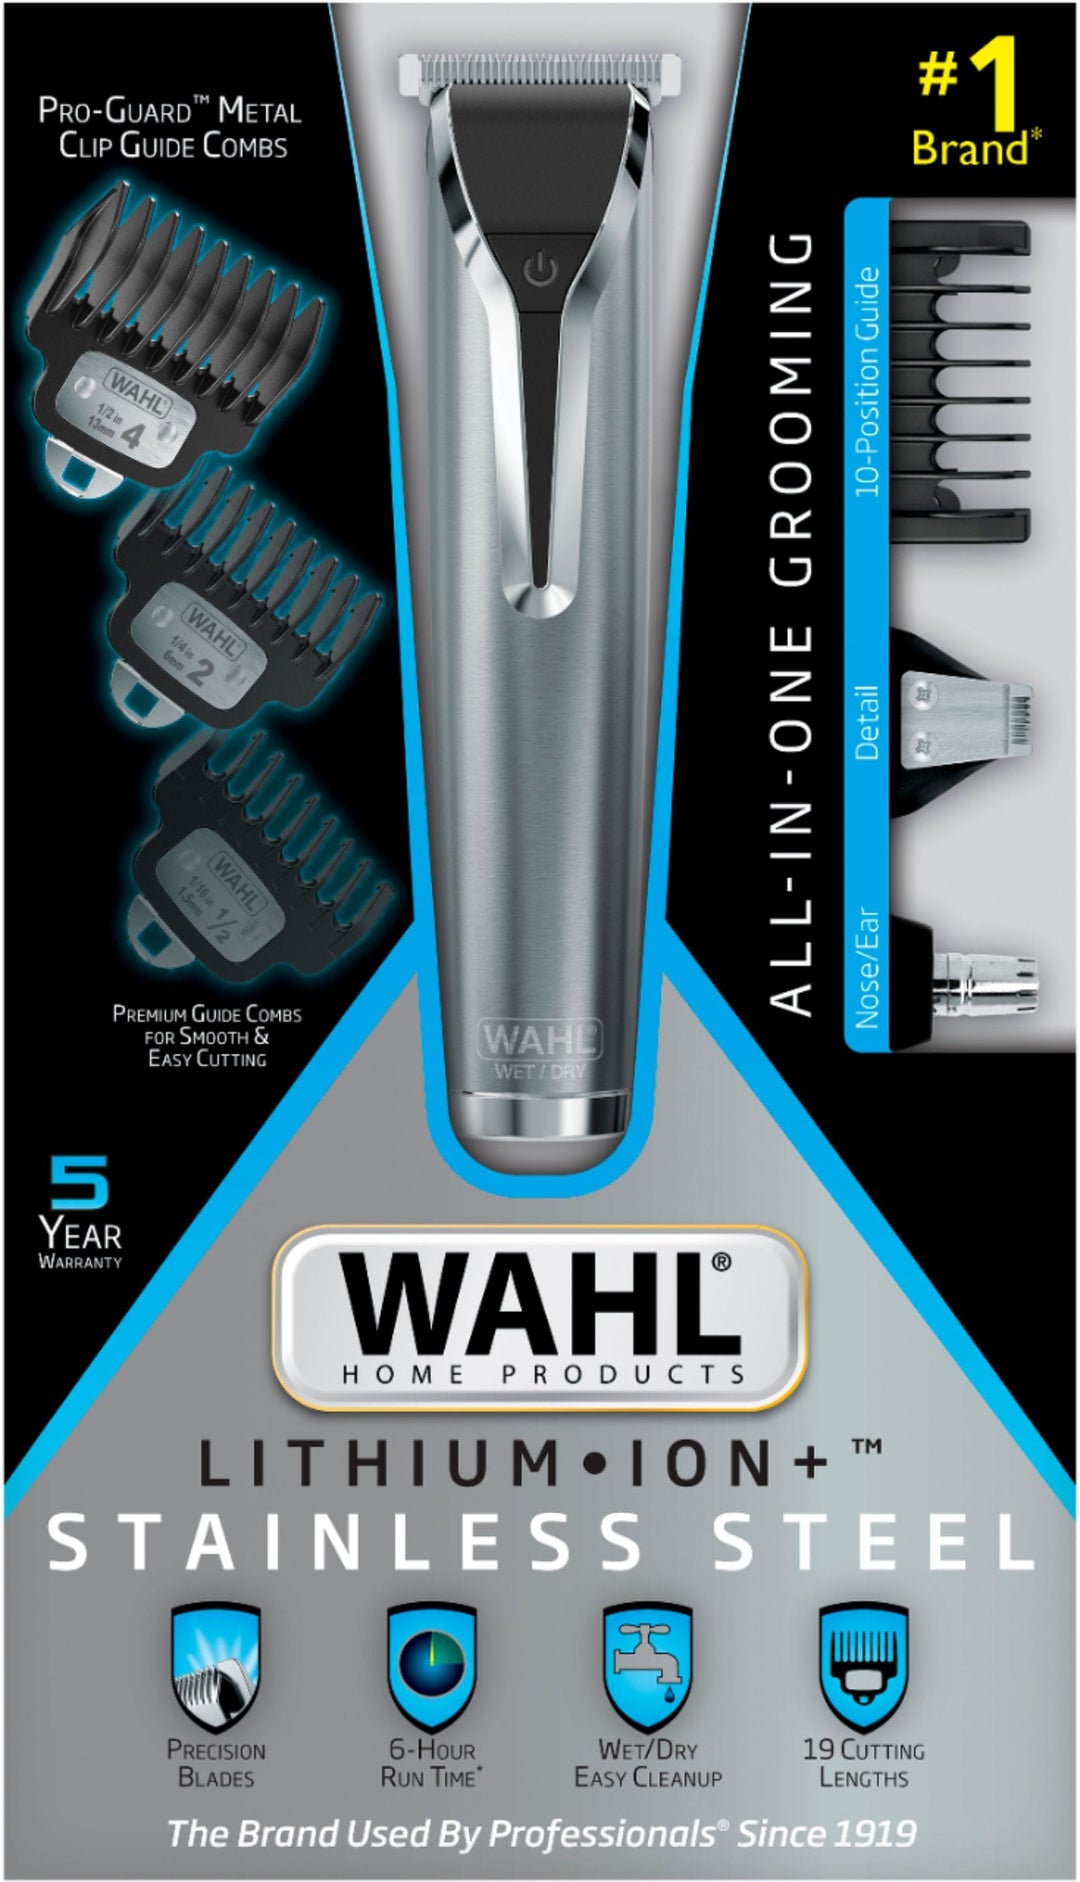 Wahl - Stainless Steel LI Trimmer - 09898 - Silver - Stainless Steel_2